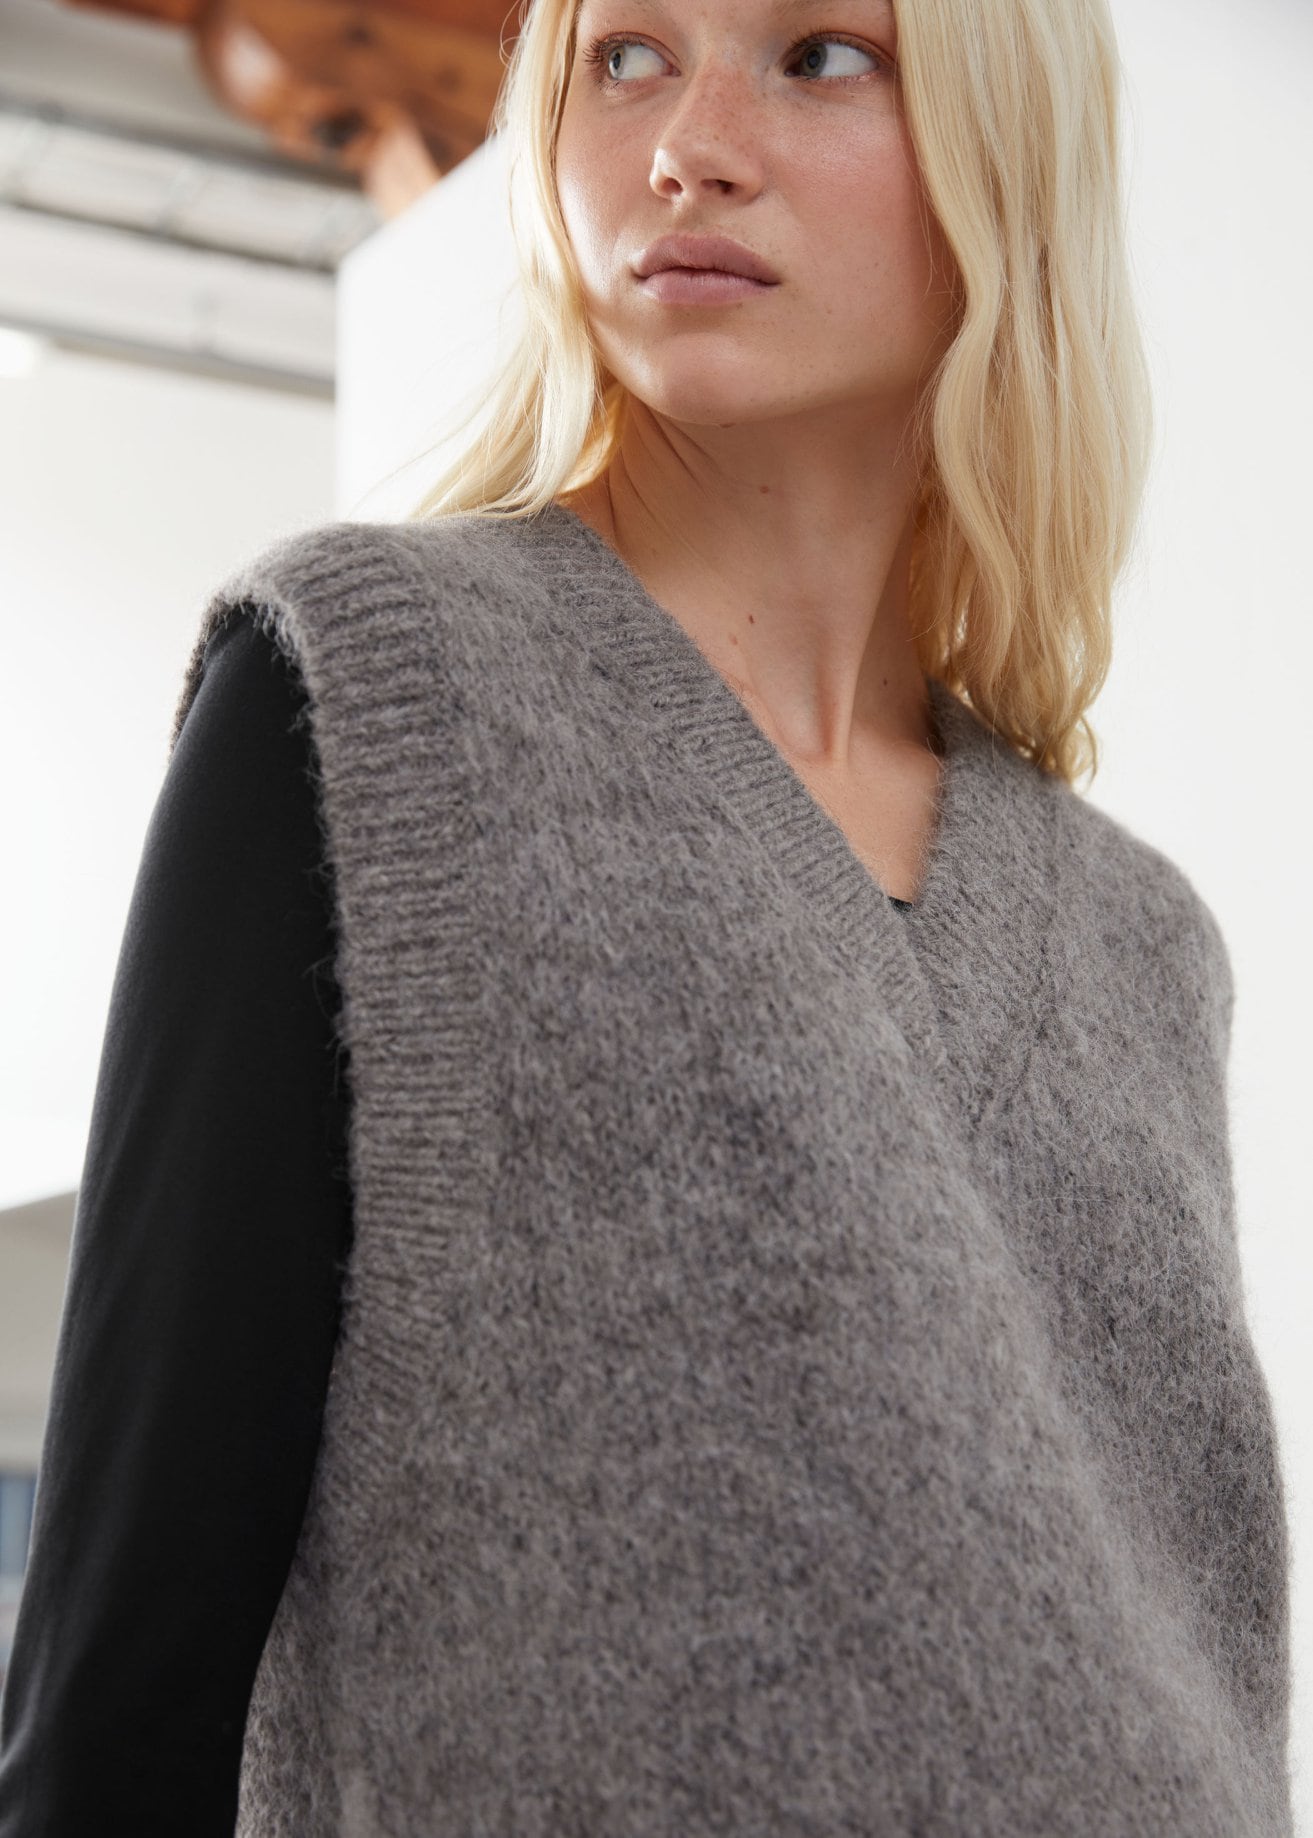 & Other Stories Oversized Wool Knit Vest